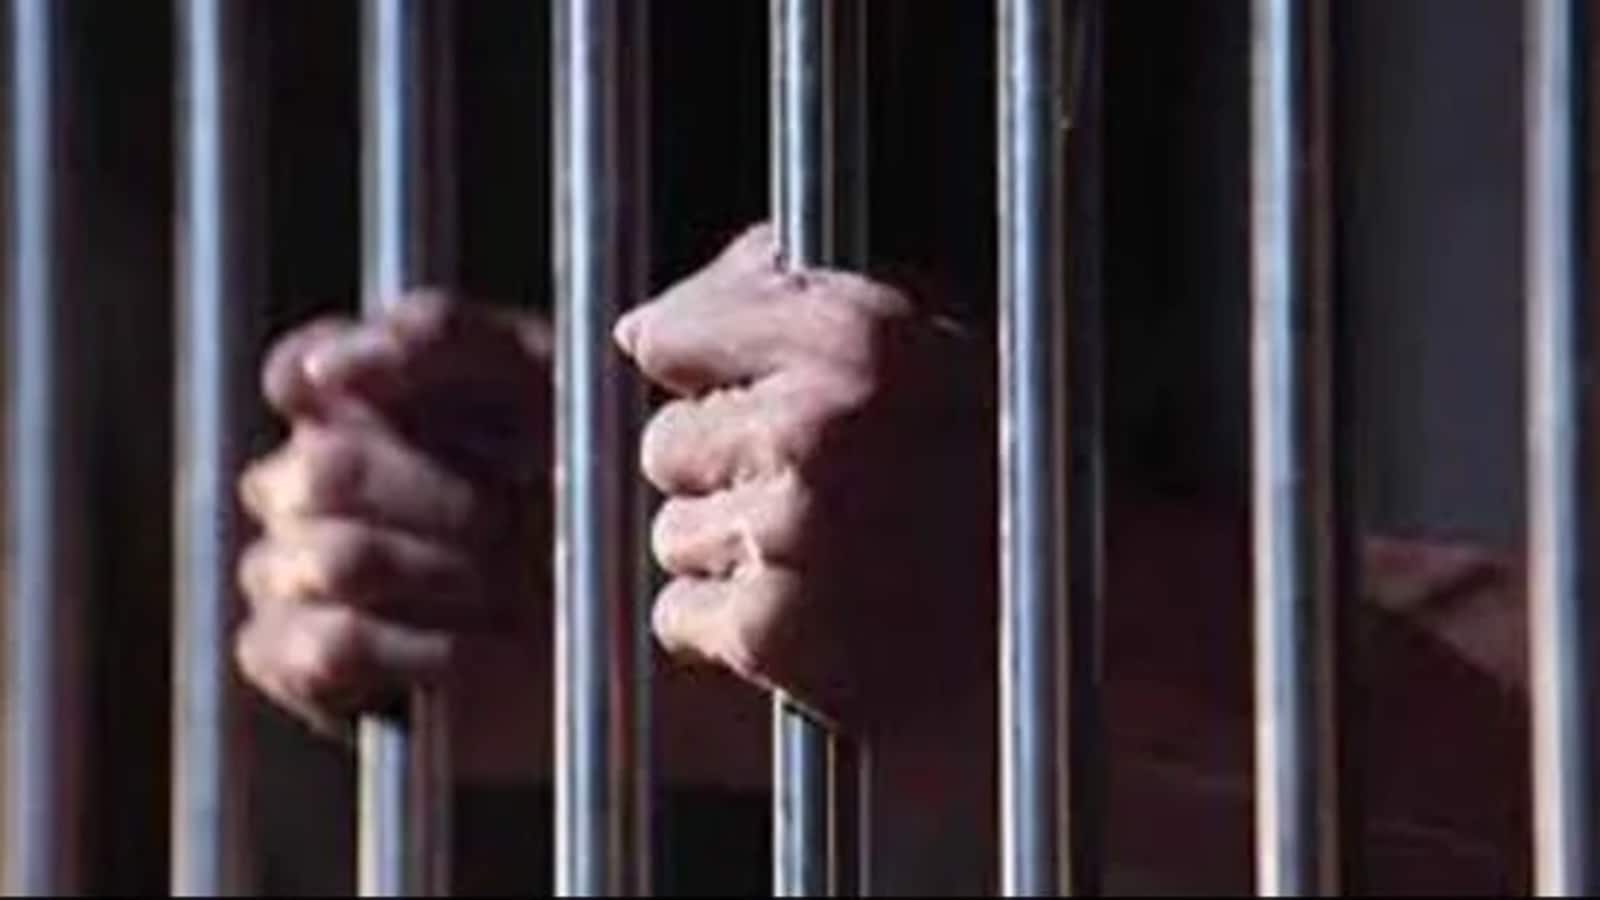 Of those languishing in West Bengal jails for years without trial